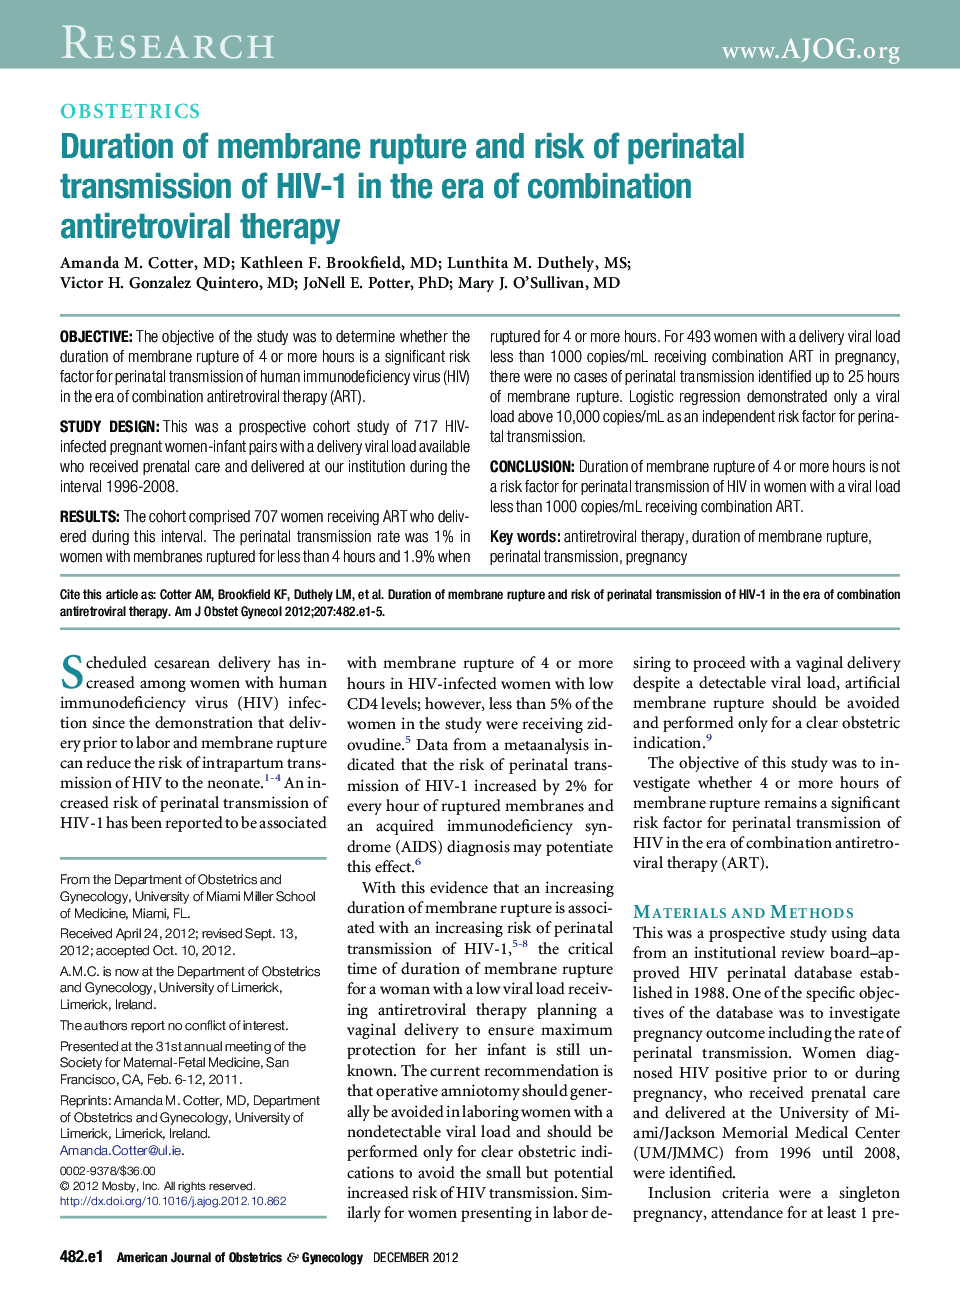 Duration of membrane rupture and risk of perinatal transmission of HIV-1 in the era of combination antiretroviral therapy